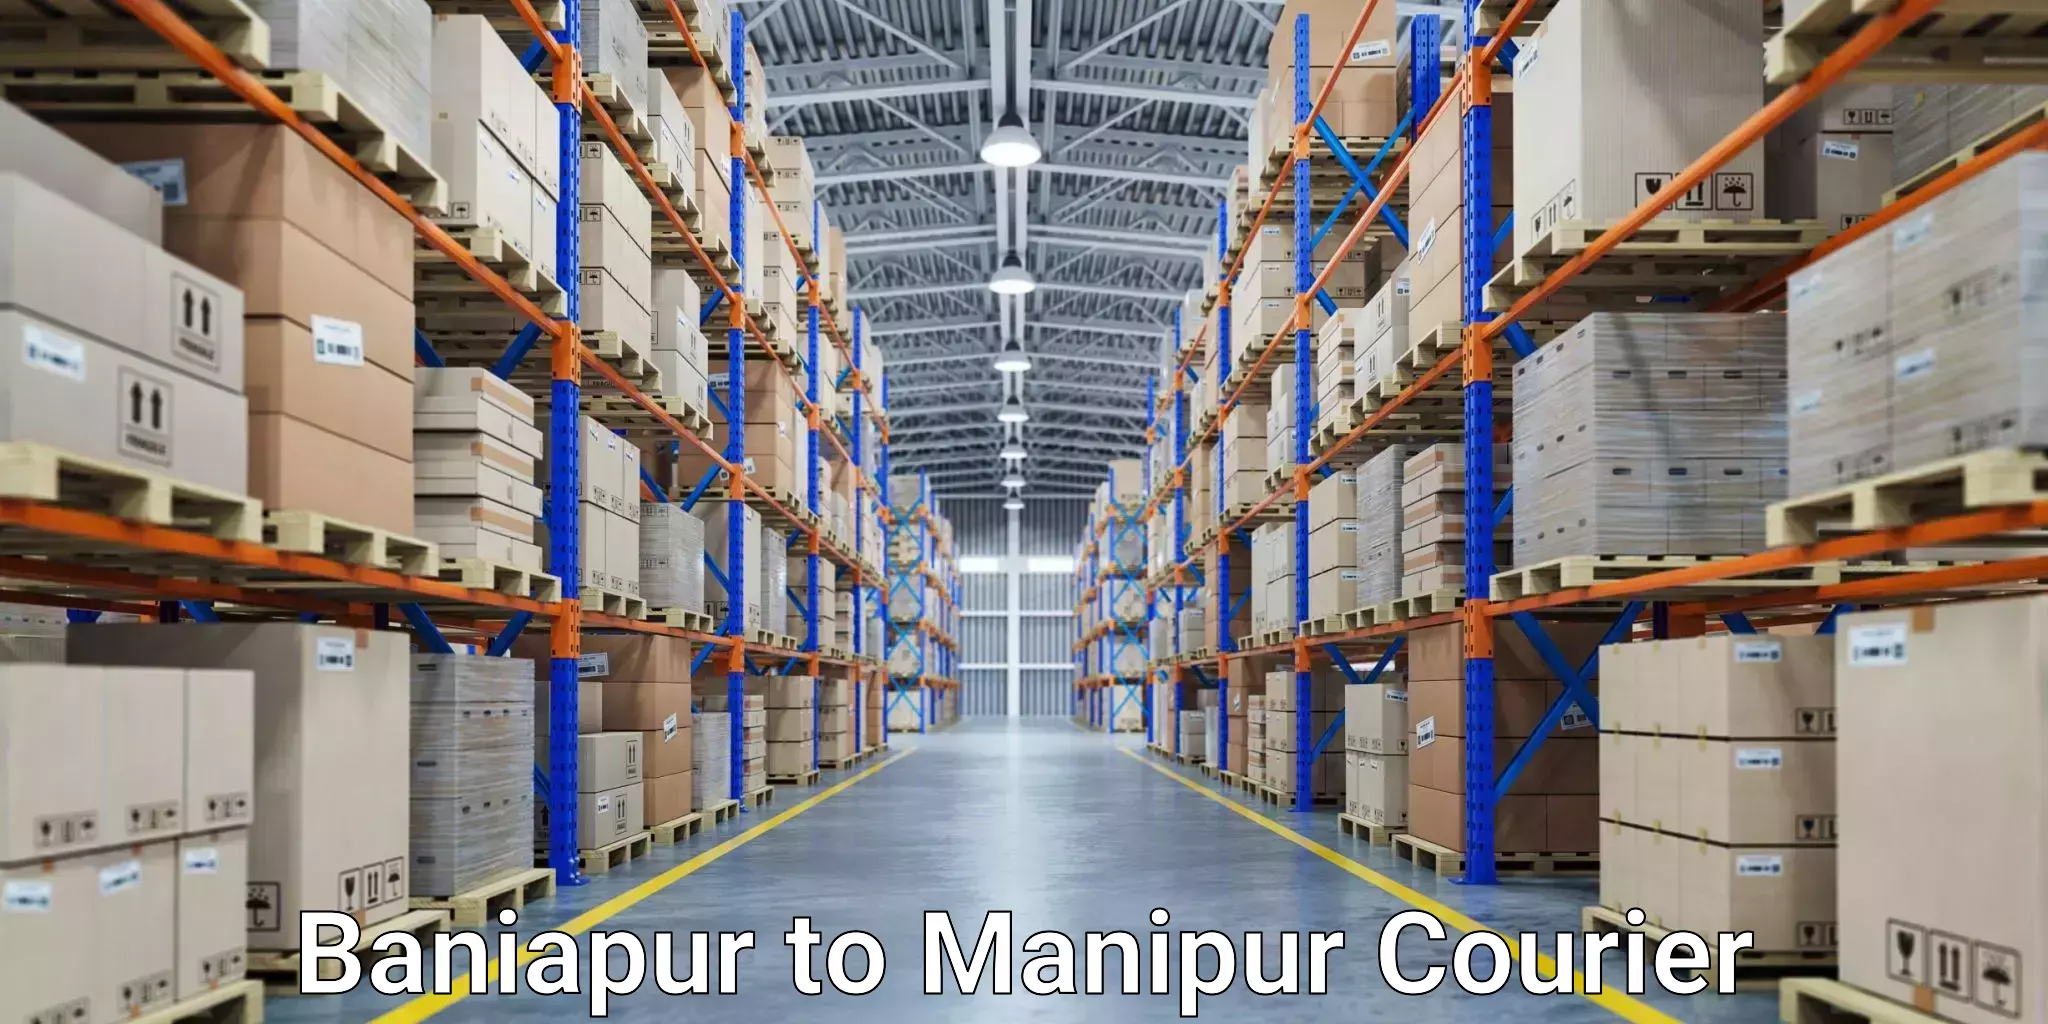 Modern delivery methods in Baniapur to Manipur